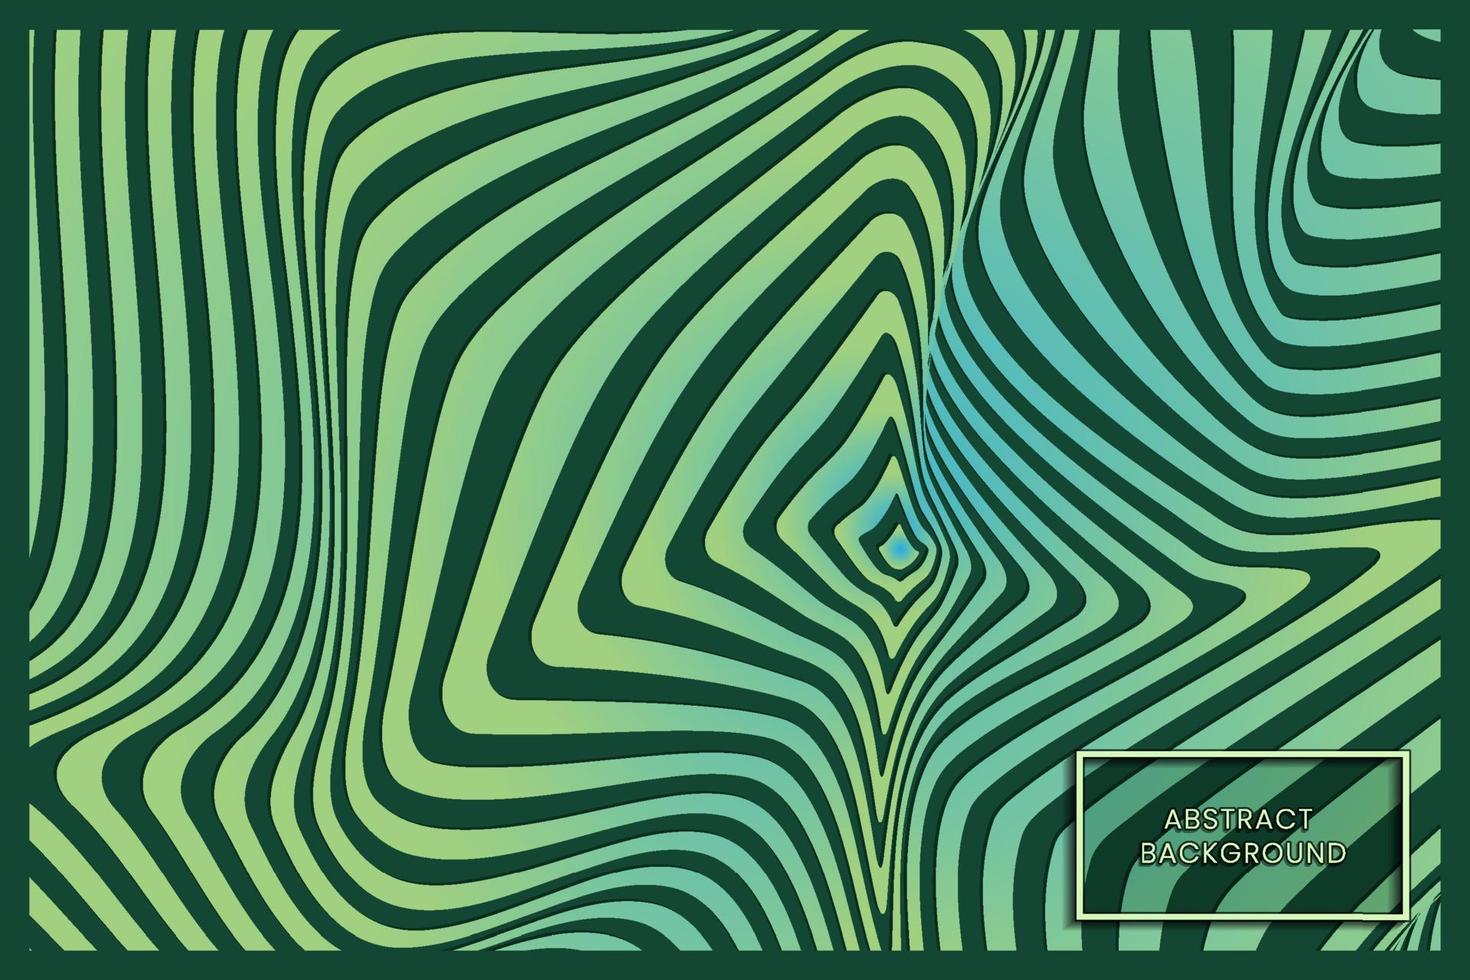 Warped green waving lines abstract background Vector